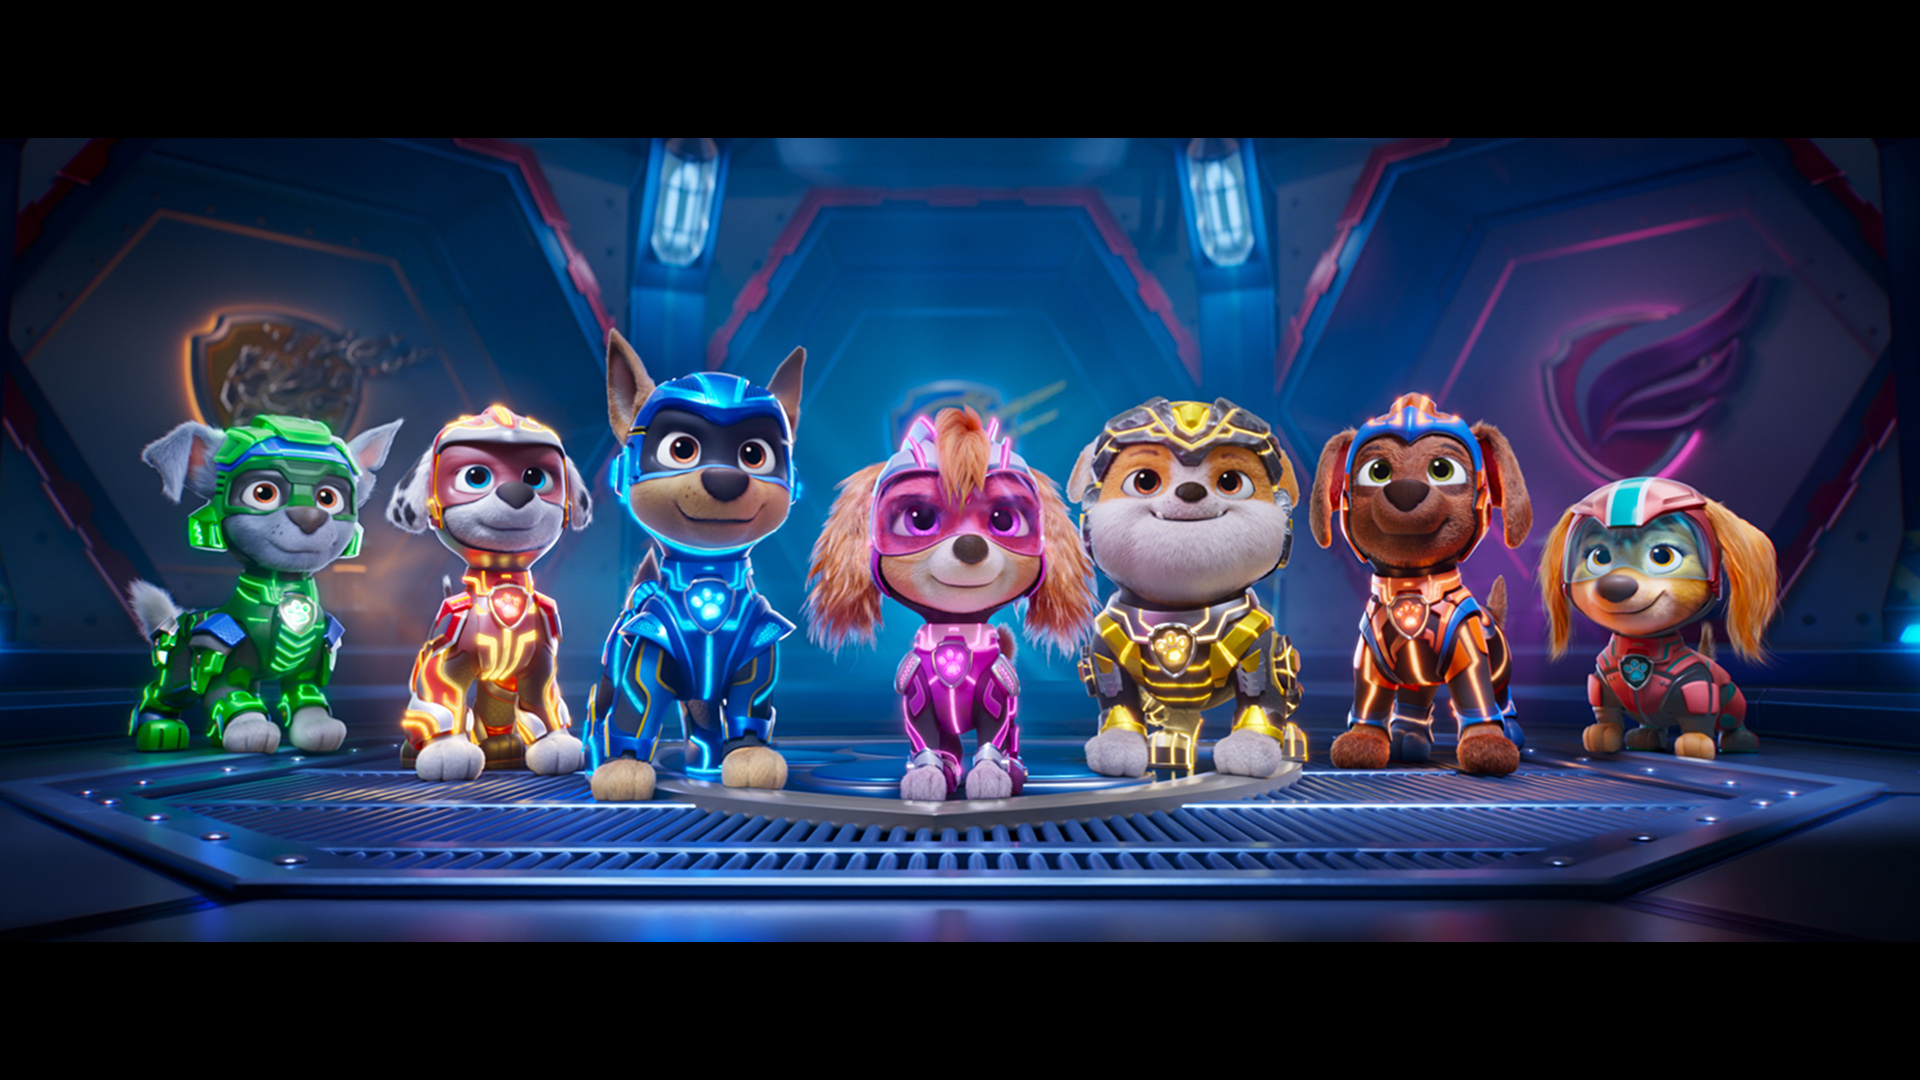 Callum Shoniker as “Rocky", Christian Corrao as “Marshall", Christian Convery as “Chase", McKenna Grace as “Skye", Luxton Handspiker as “Rubble", Nylan Parthipan as “Zuma", and Marsai Martin as “Liberty" in Paw Patrol: The Mighty Movie from Spin Master Entertainment, Nickelodeon Movies, and Paramount Pictures.